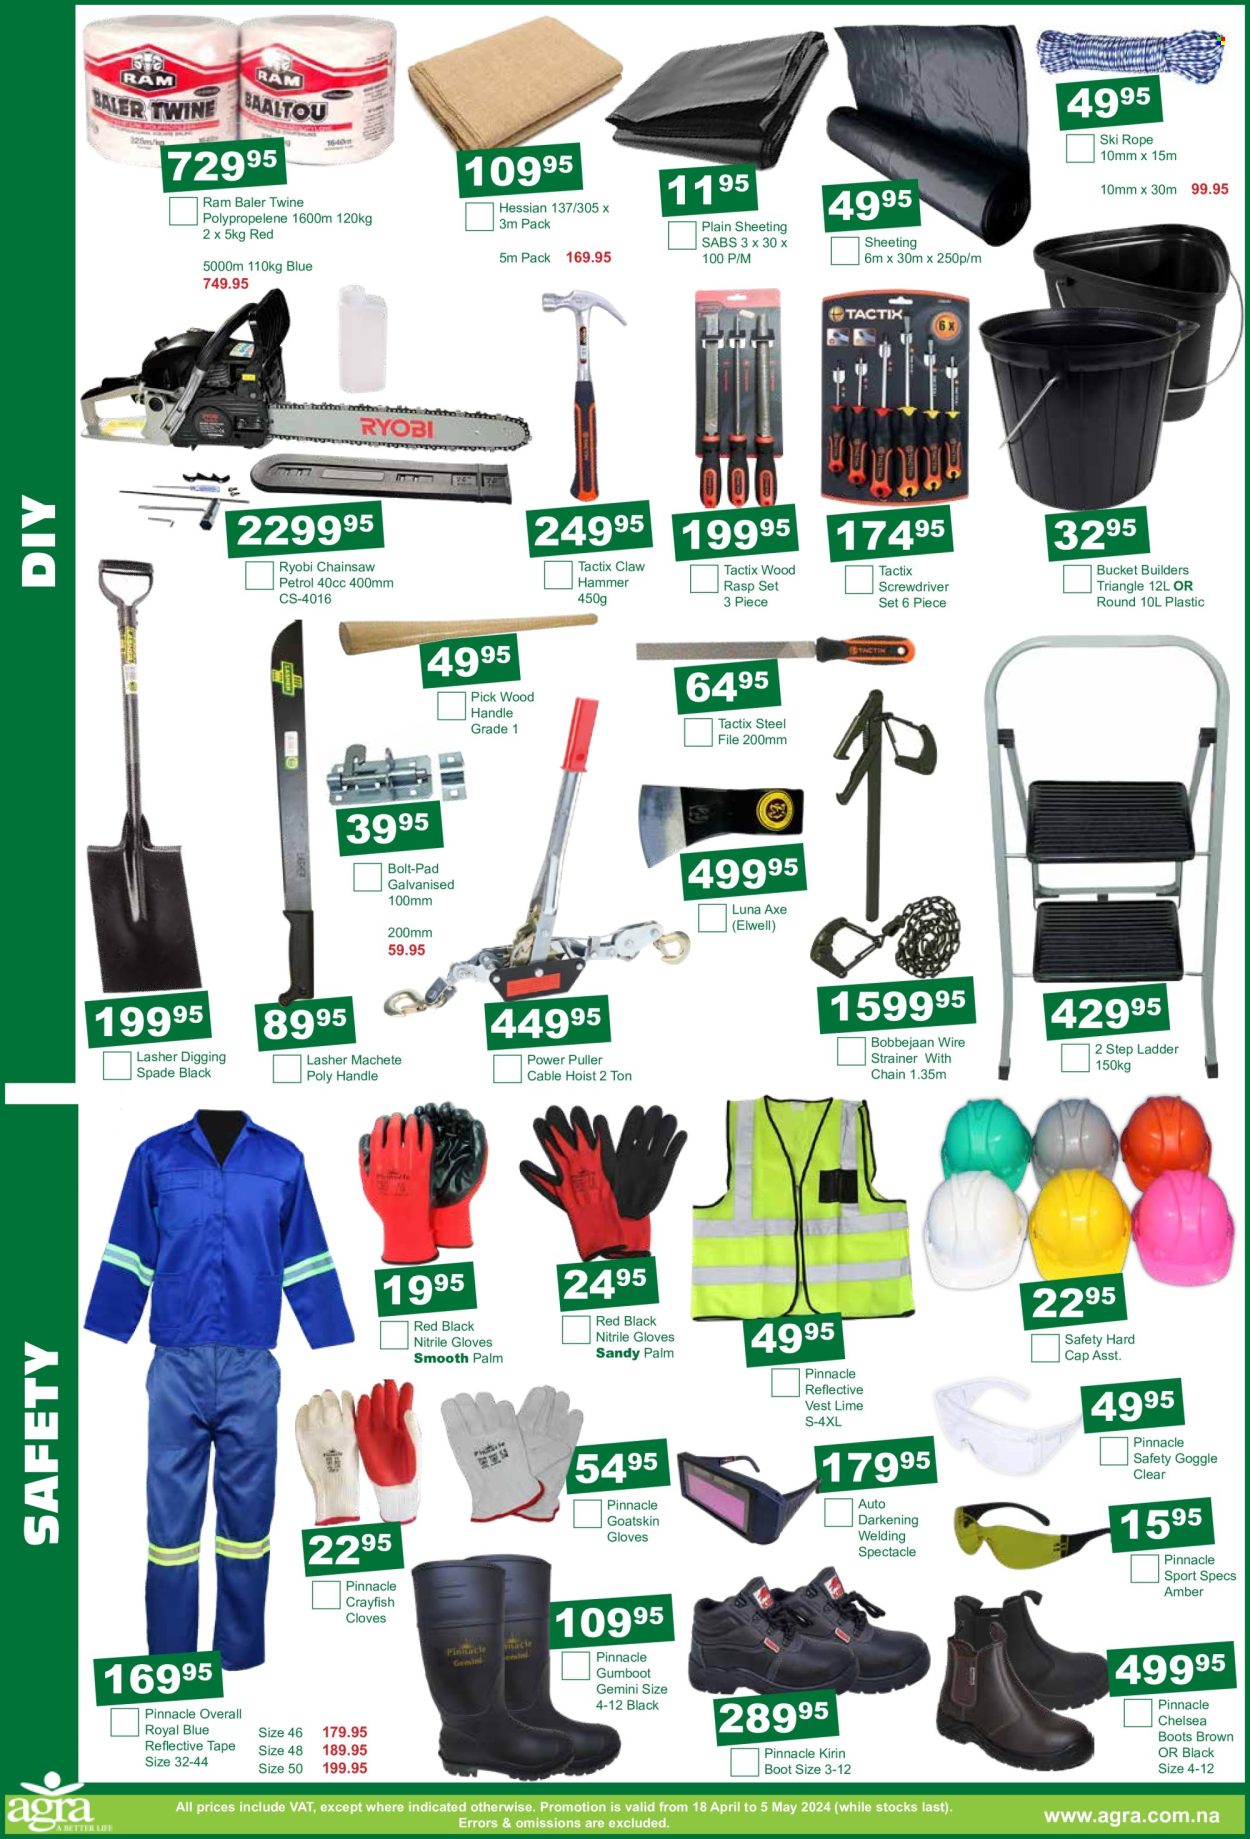 thumbnail - Agra catalogue  - 18/04/2024 - 05/05/2024 - Sales products - boots, bucket, rope, vest, stepladder, sheeting, bolt, screwdriver, hammer, Ryobi, chain saw, spade, claw hammer, screwdriver set, Axe, palm. Page 6.